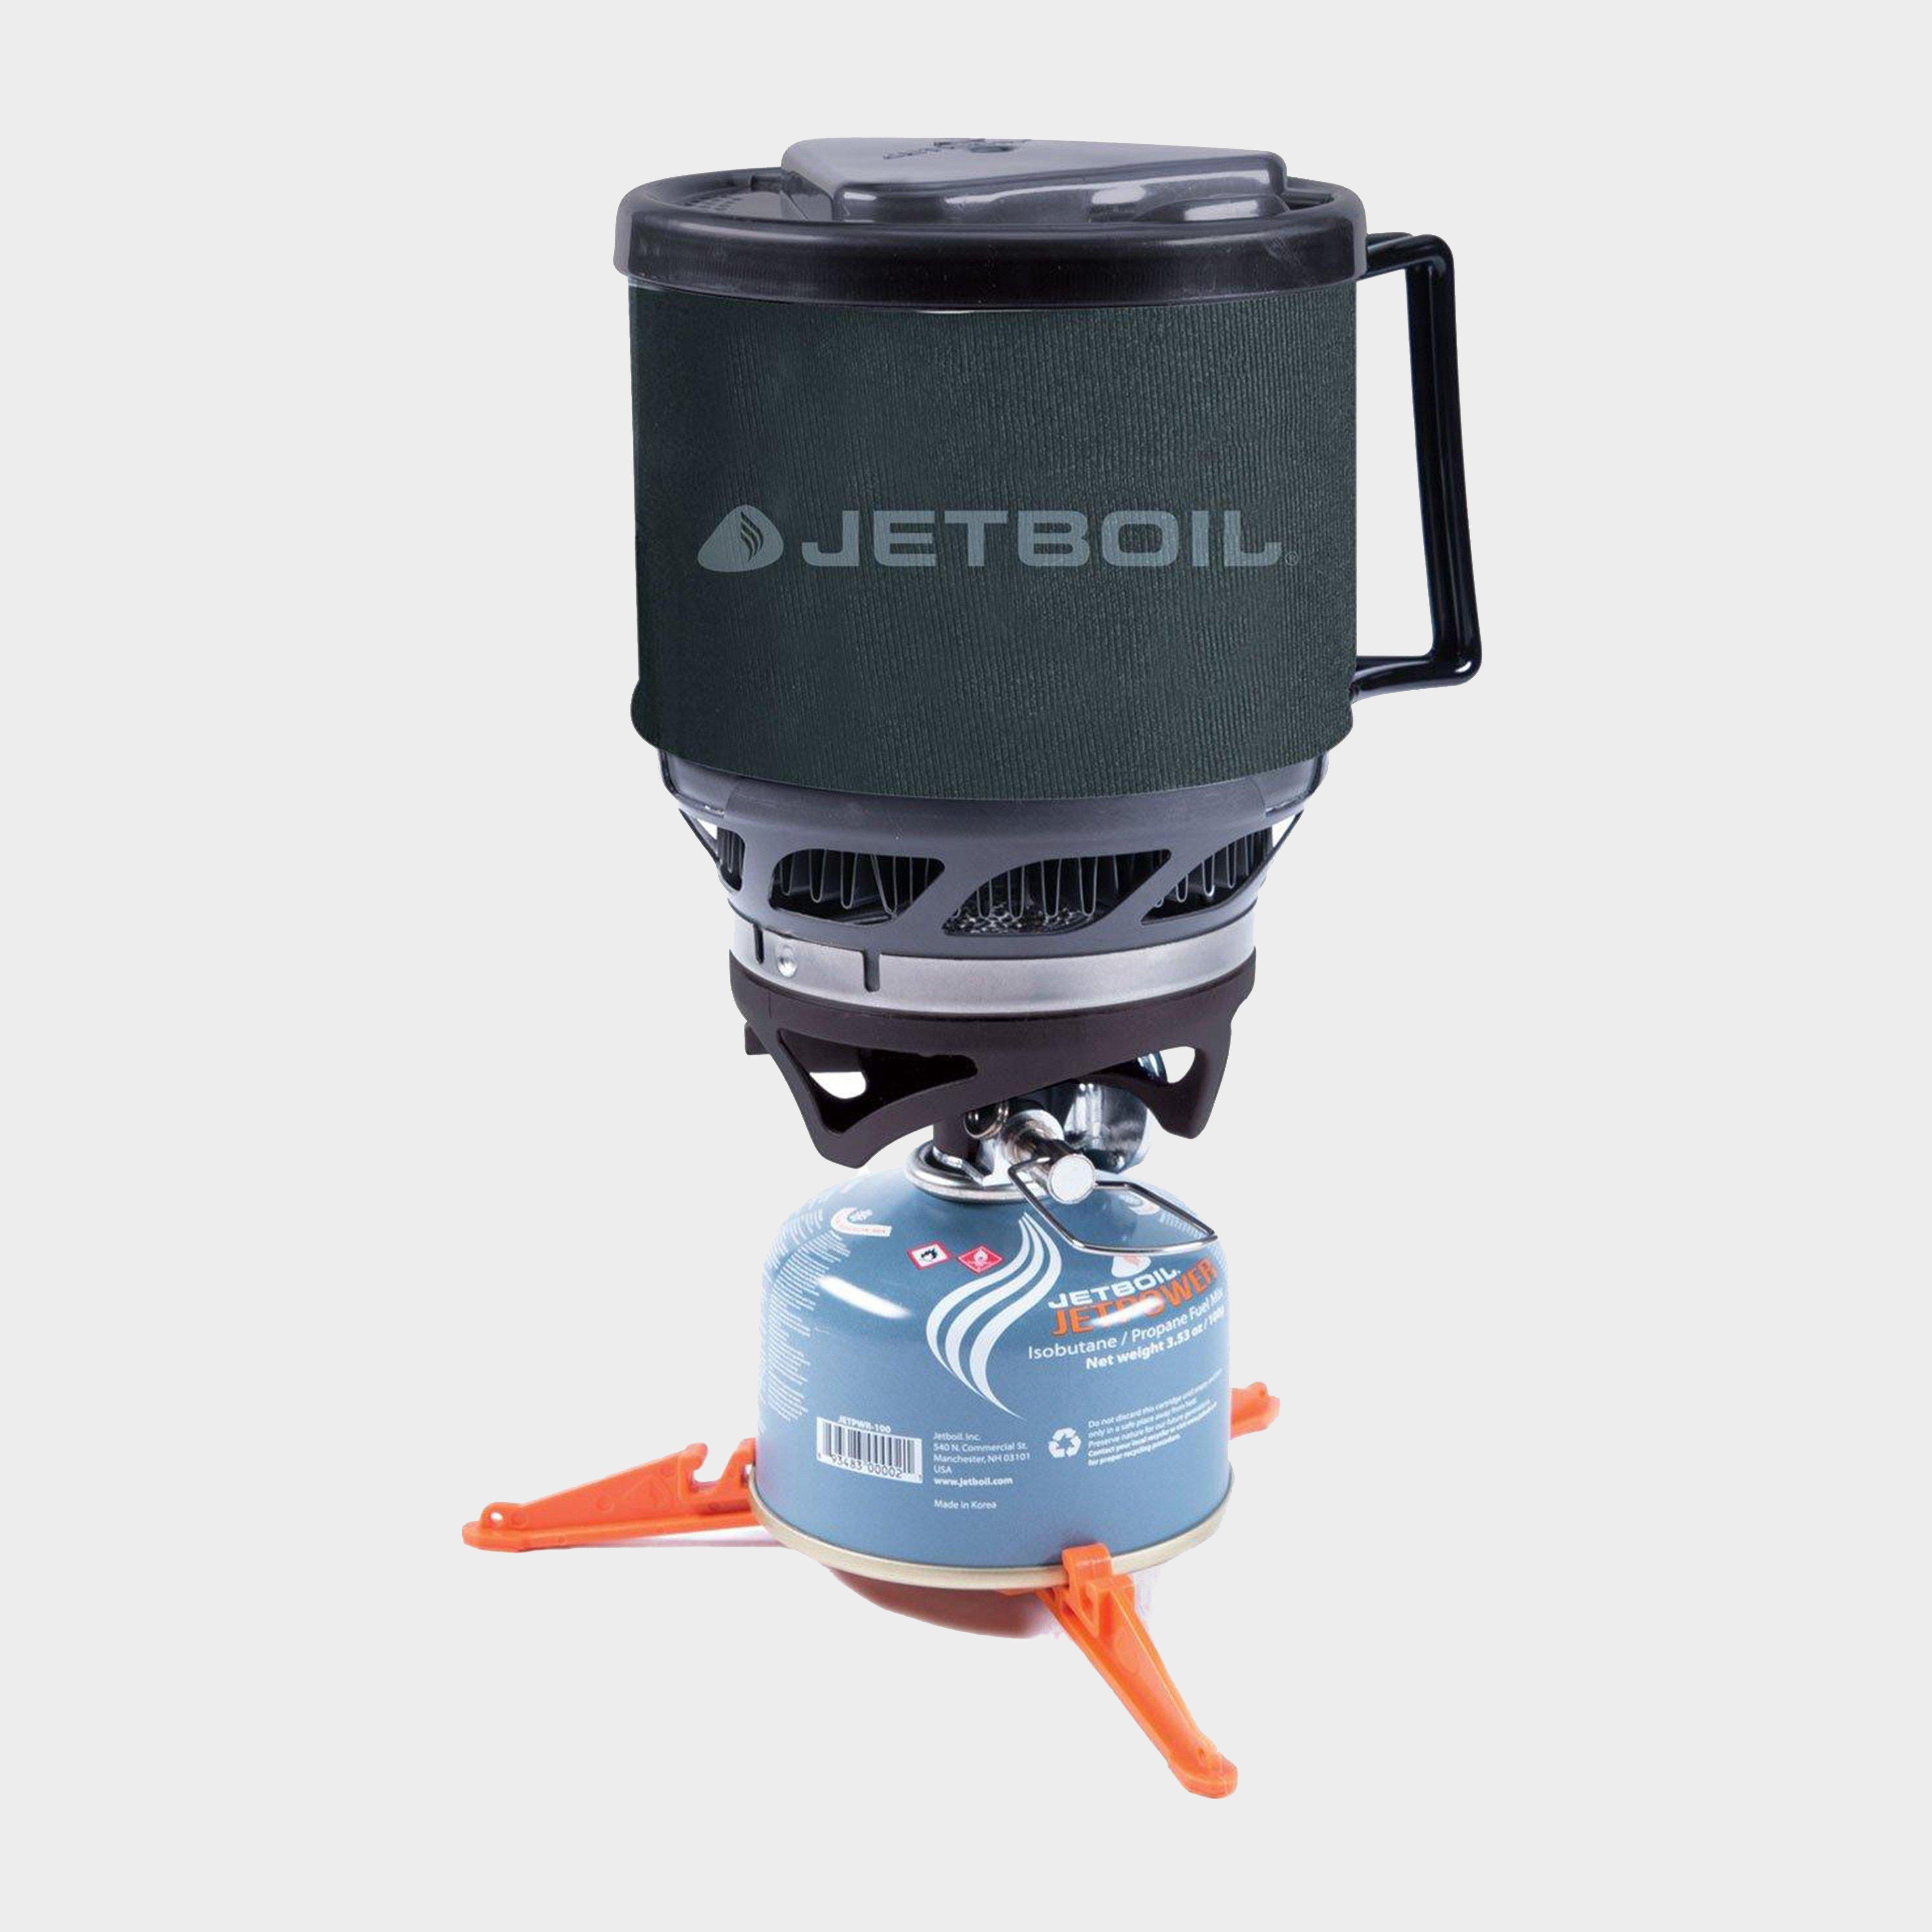 Jetboil Jetboil Minimo Cooking System - Carbon, Carbon